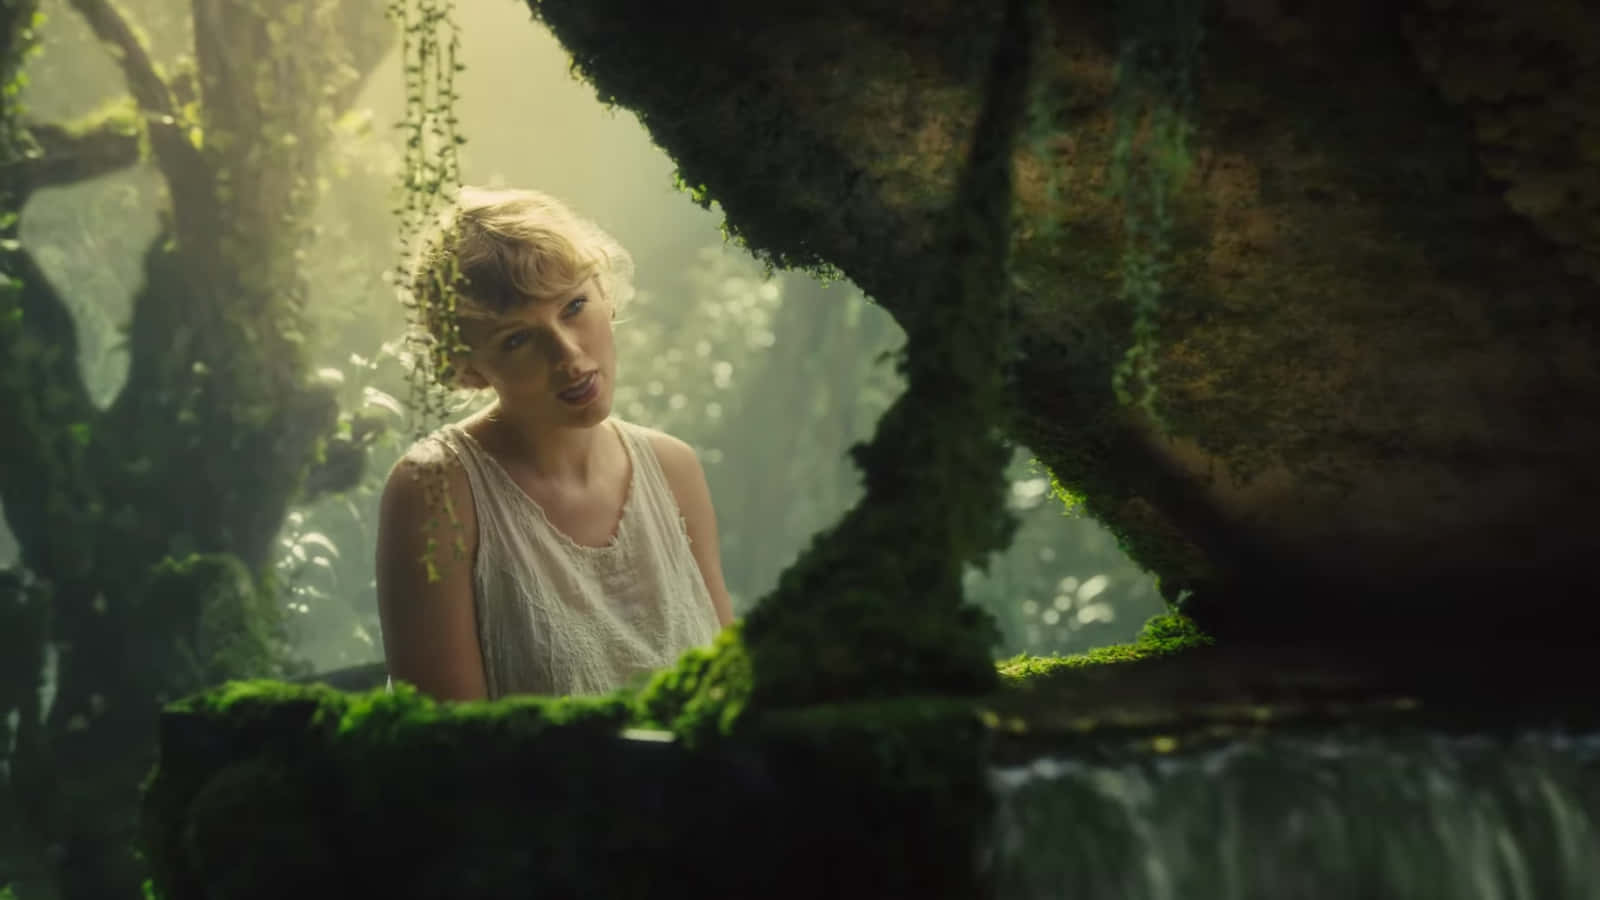 Taylor Swift looks into the camera during the recording of 'Folklore', an album she released in 2020 Wallpaper